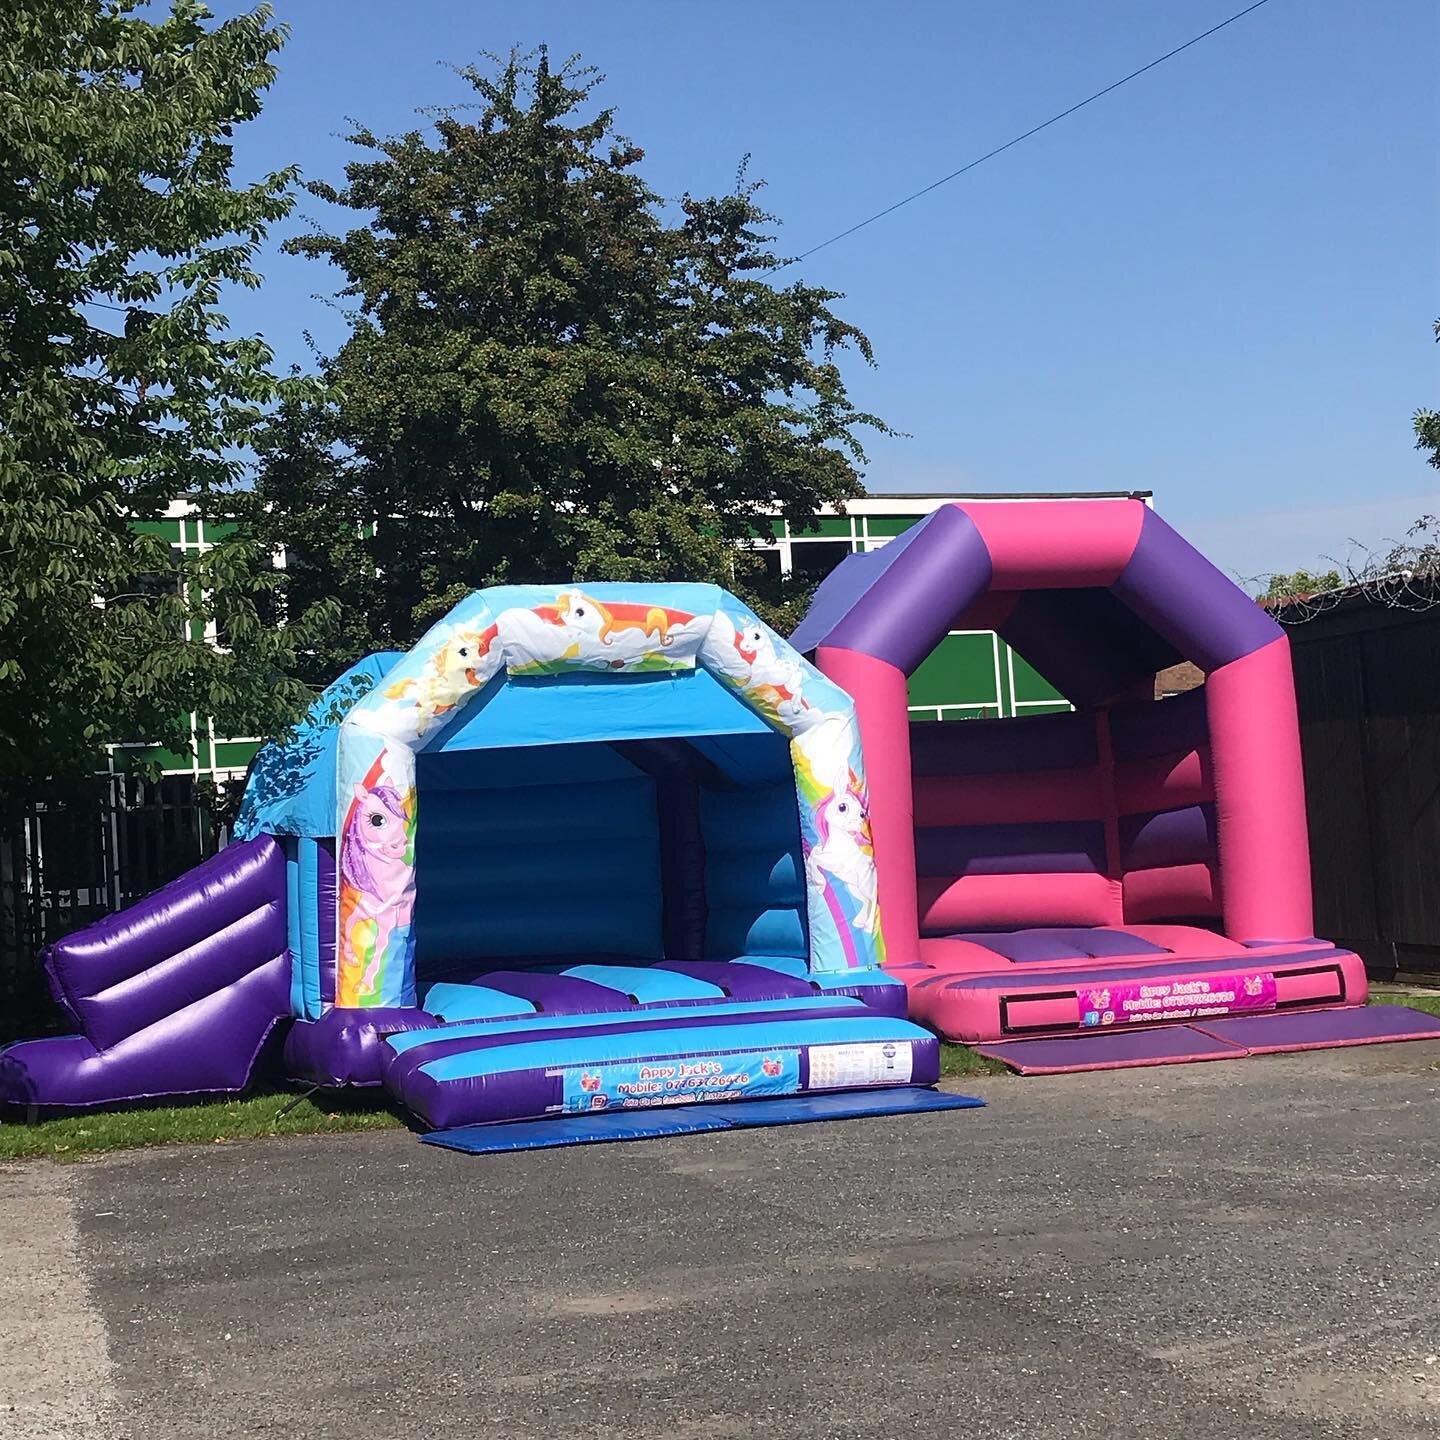 2 girls castles as a package get booking now for your bouncy castles at a good price